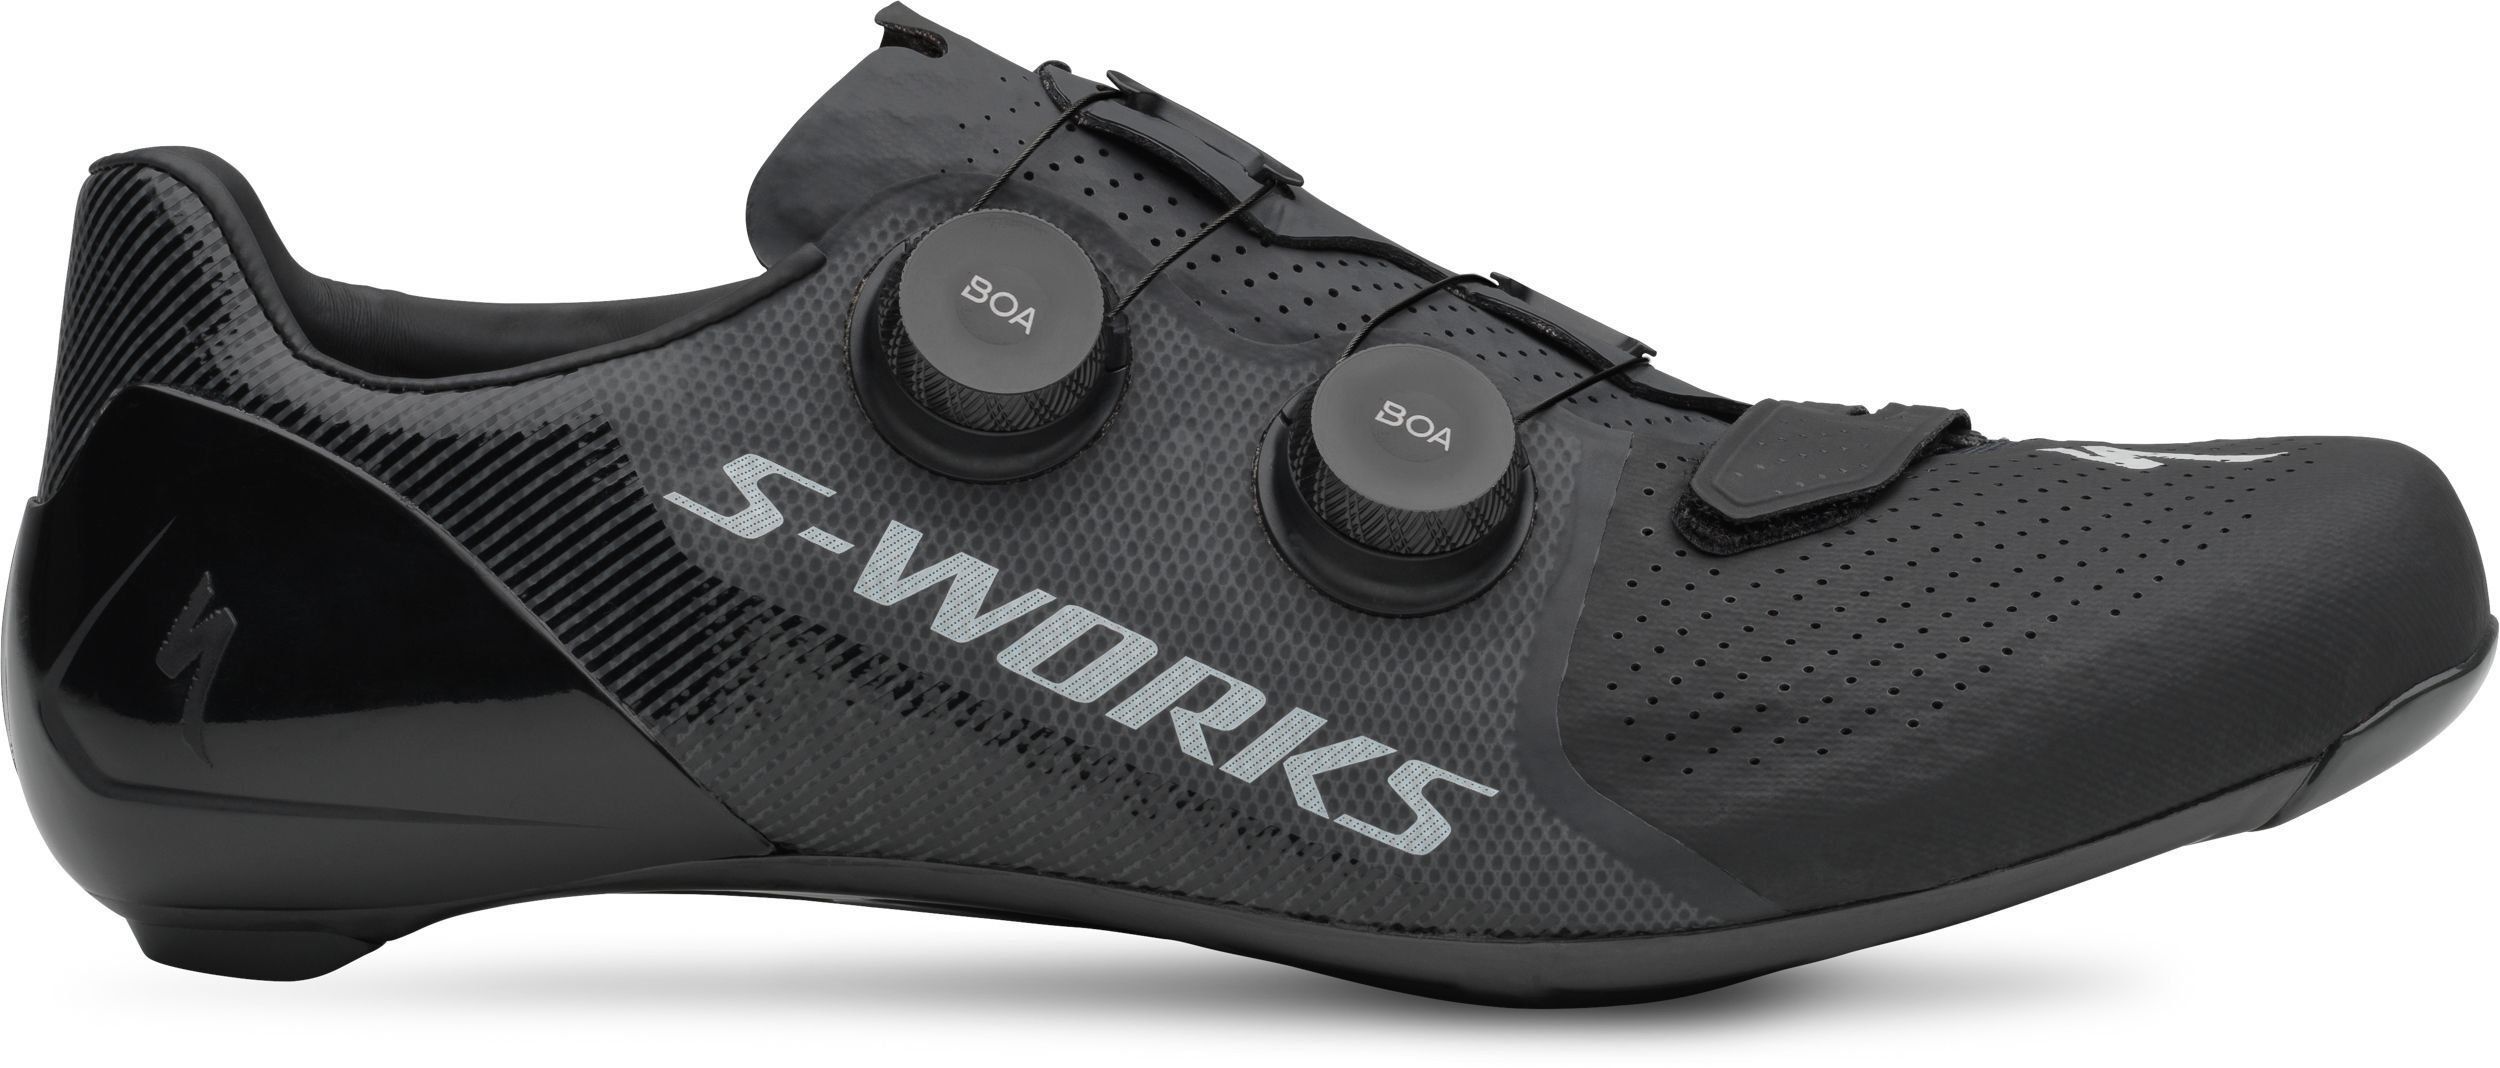 specialized s works shoes 7